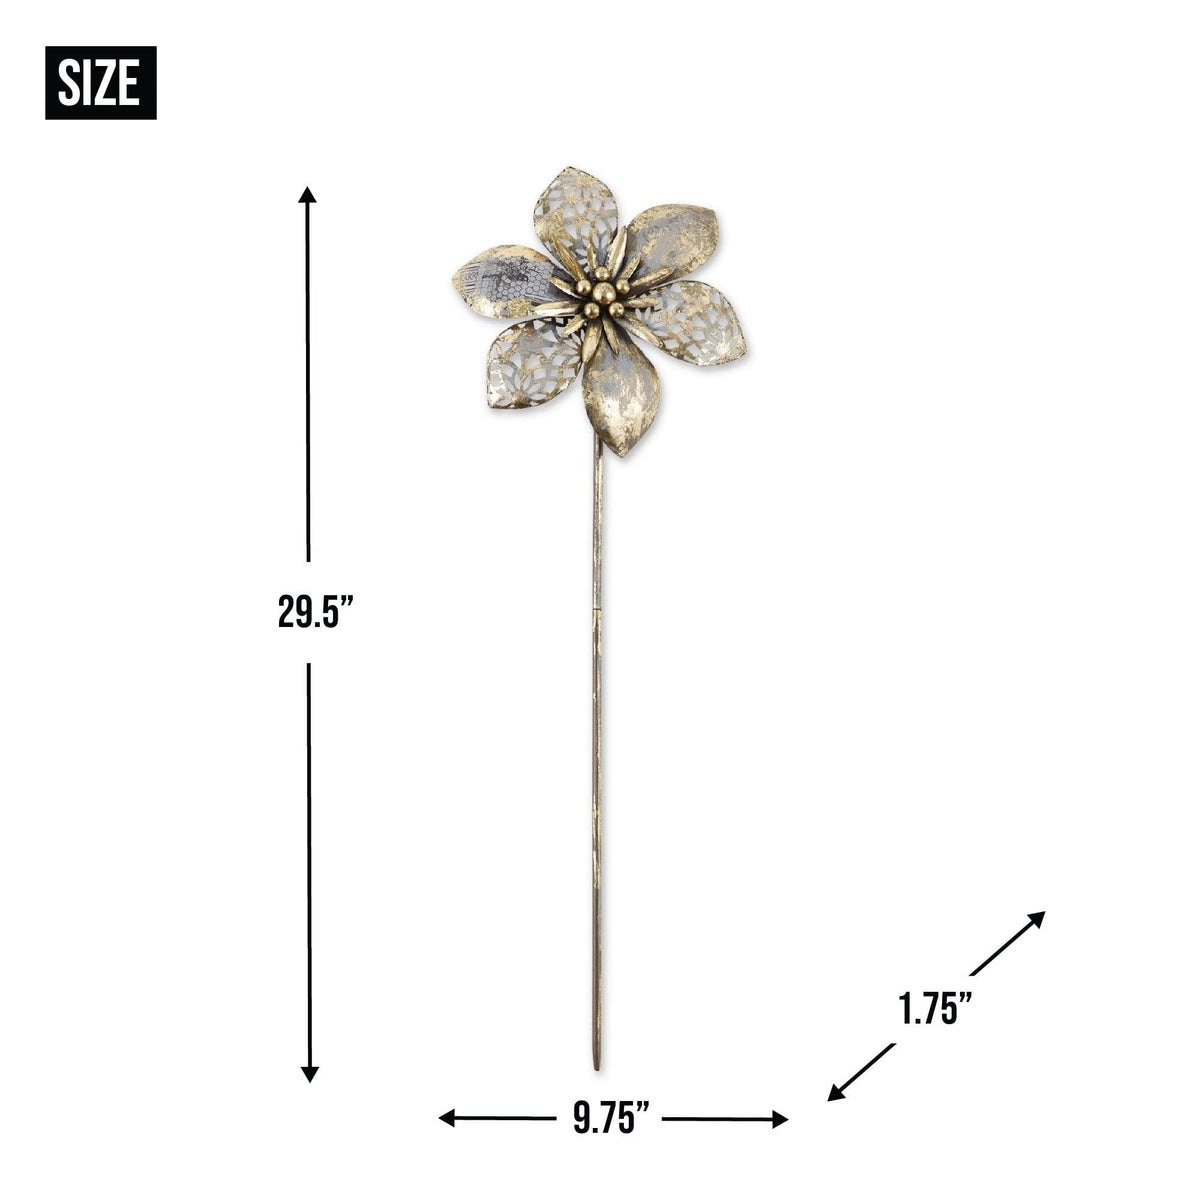 Small, Medium, and Large Flower Garden Stakes